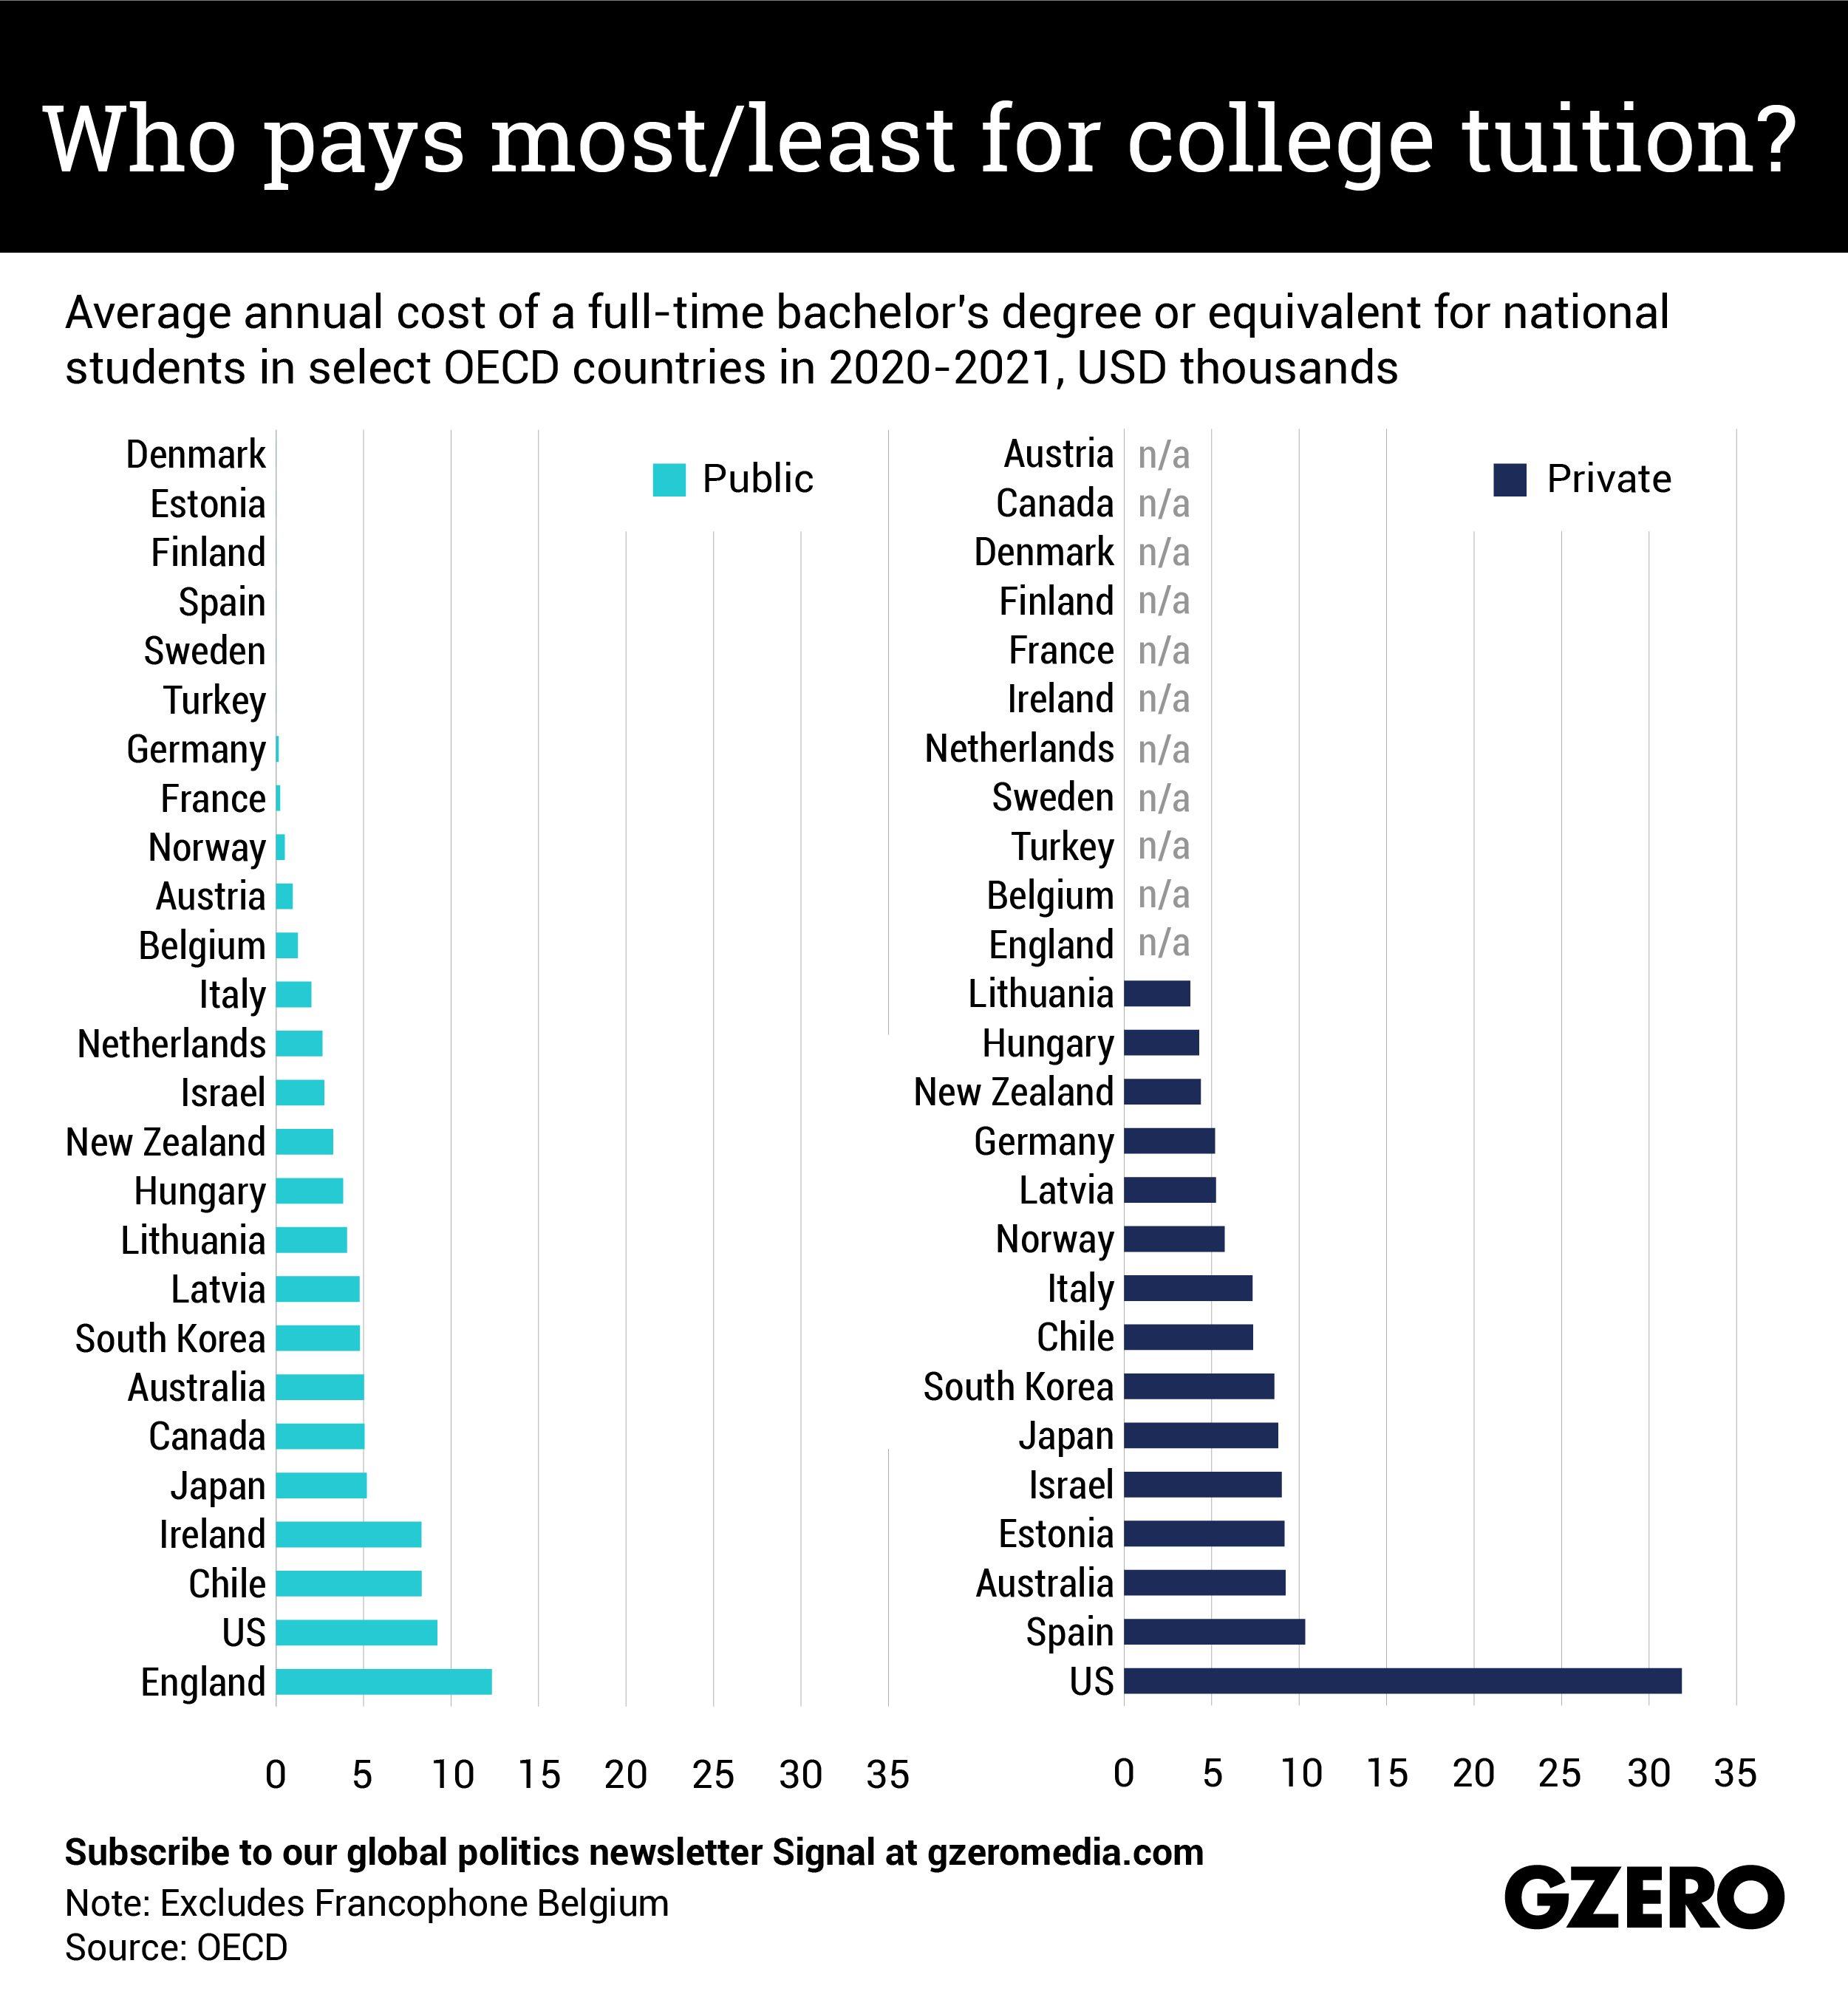 The Graphic Truth: Who pays most/least for college tuition?